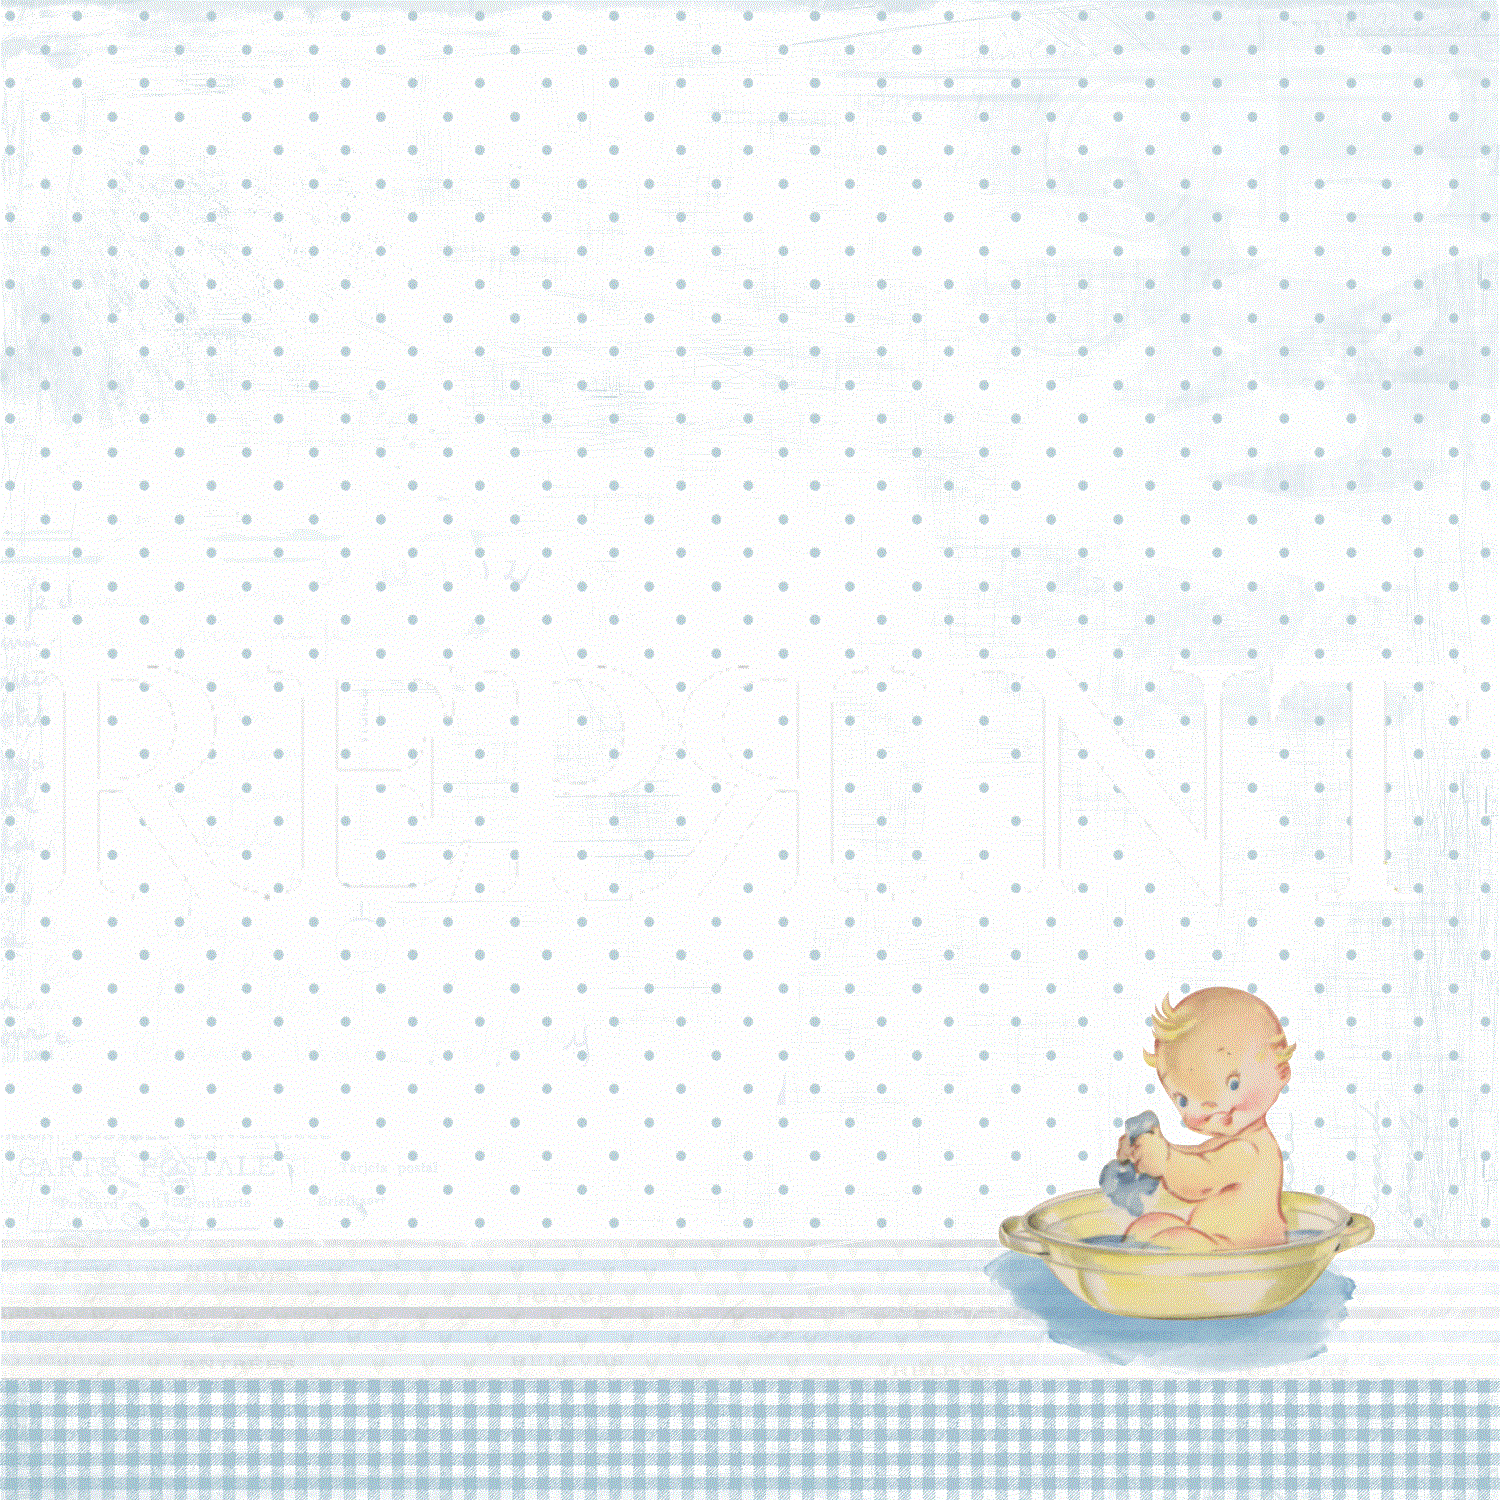 Reprint - It´s a boy Collection - Baby in bath tub- 12 x 12